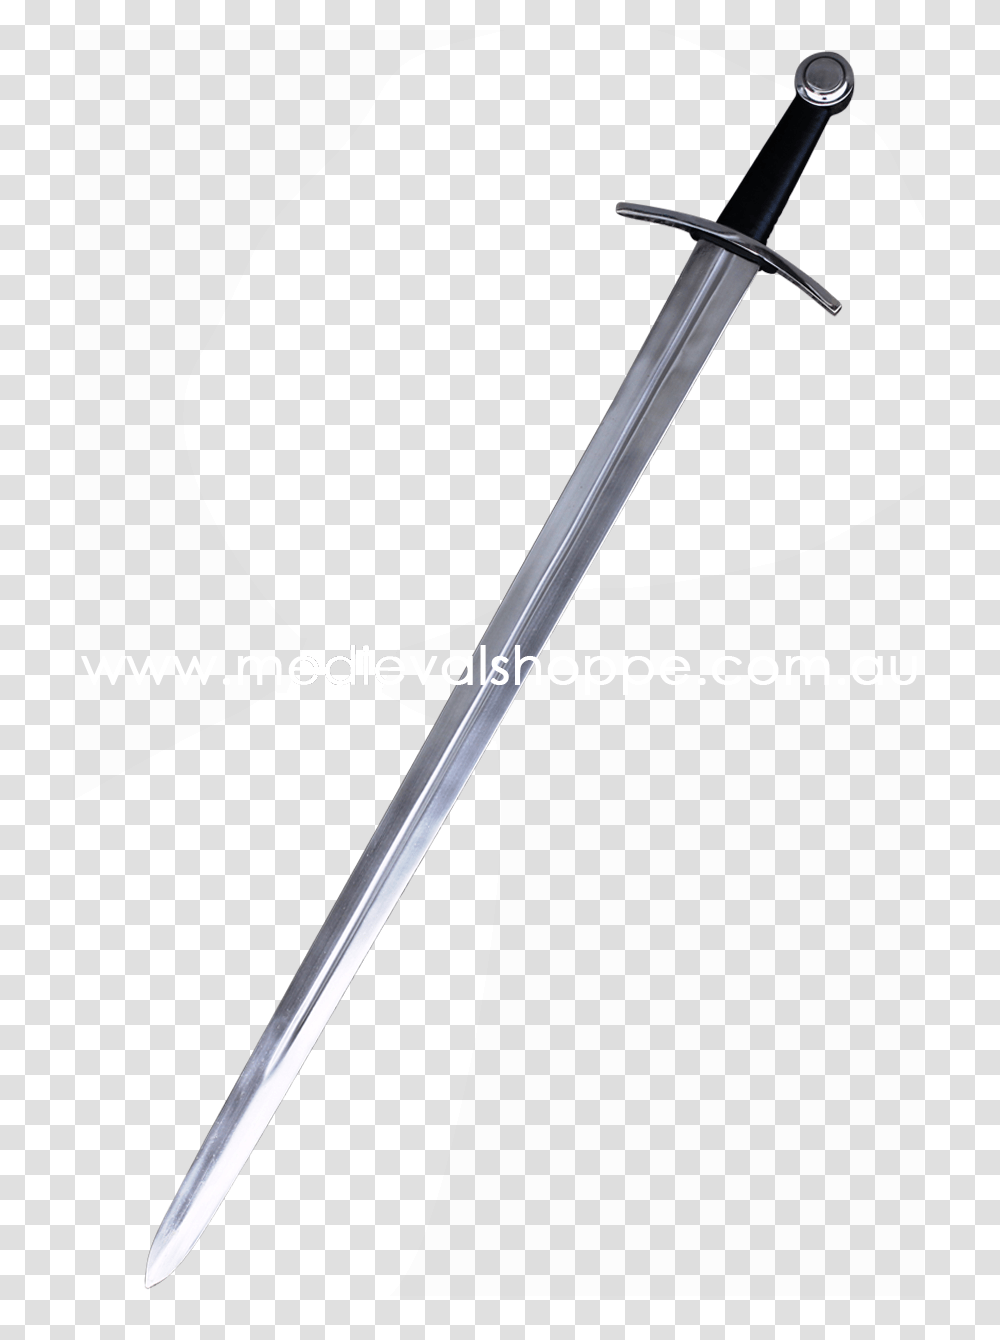 Medieval Crossed Swords Swords Battle Blades Free Vector, Weapon, Weaponry, Duel, Wand Transparent Png